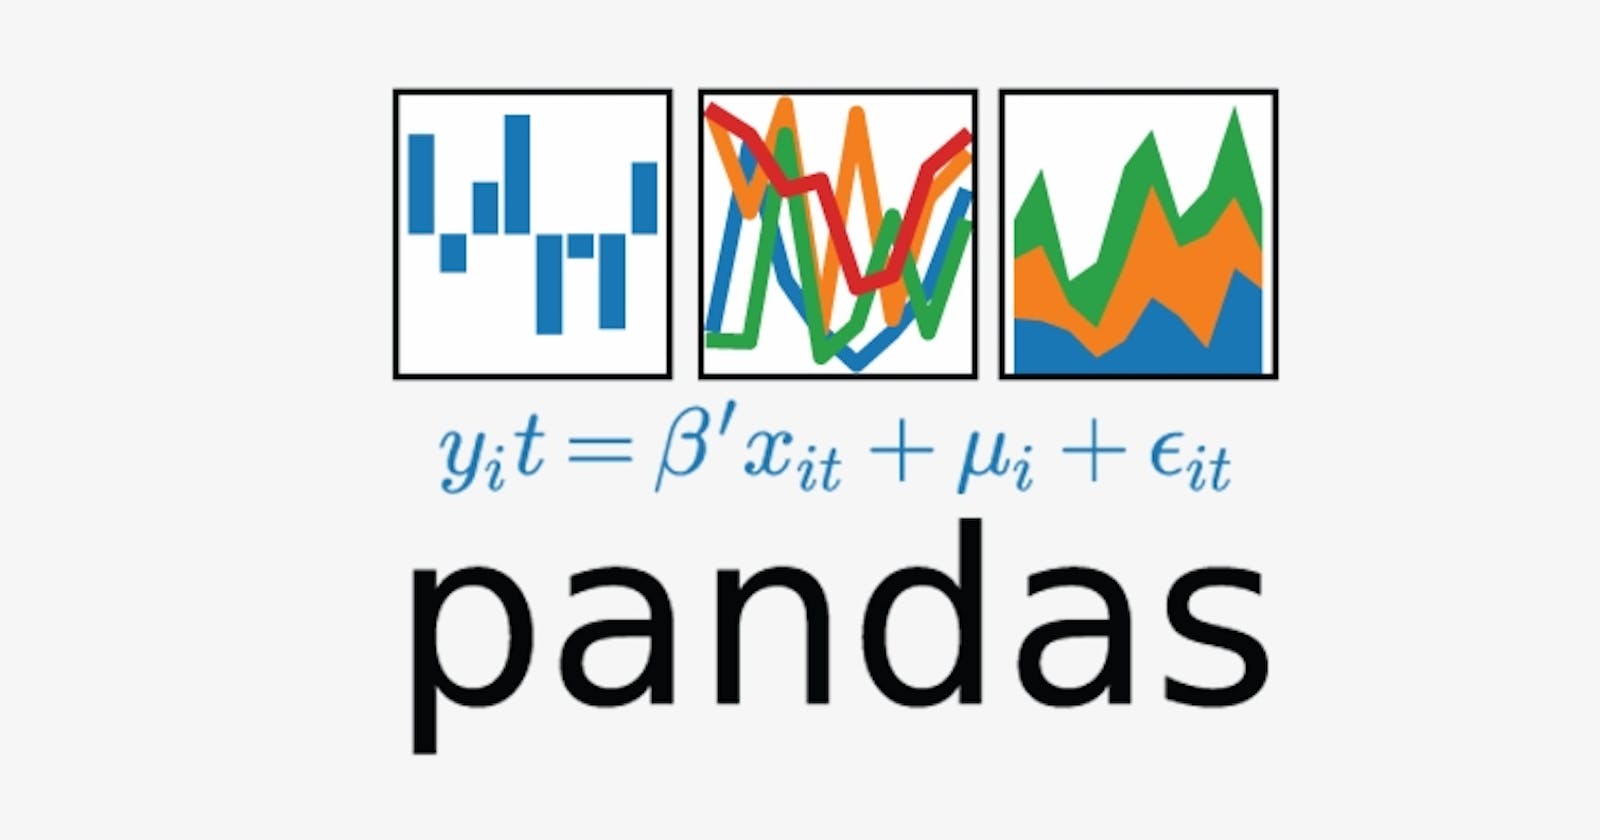 A Beginner's Guide to Series, DataFrames, and CSVs in Pandas